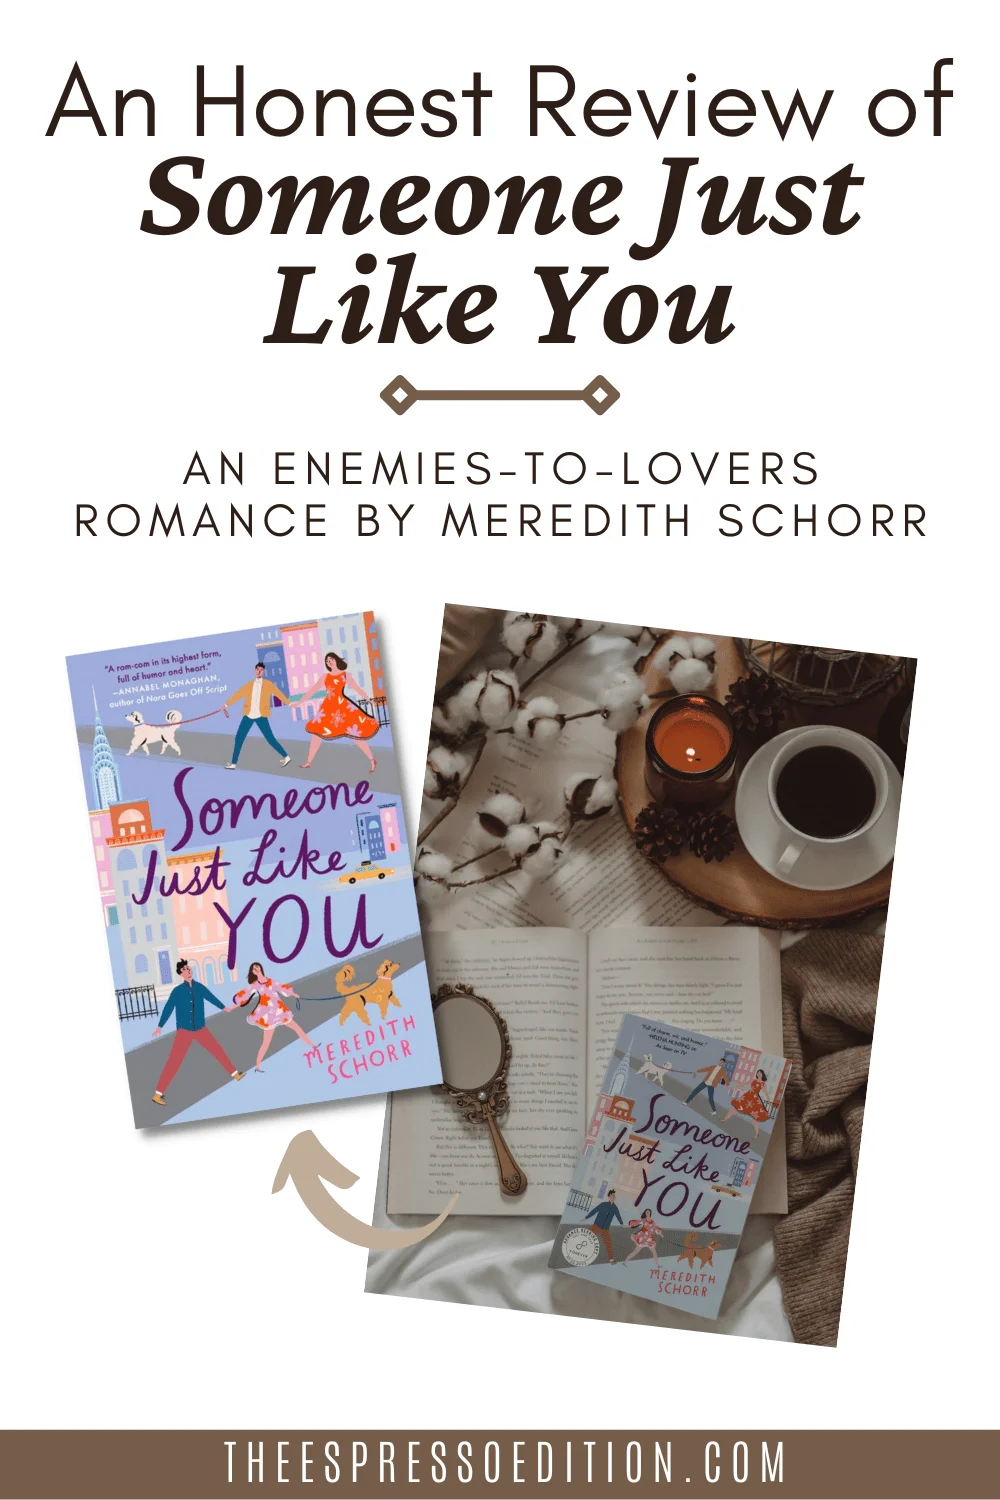 A Review of “Someone Just Like You” by Meredith Schorr by The Espresso Edition cozy bookish blog